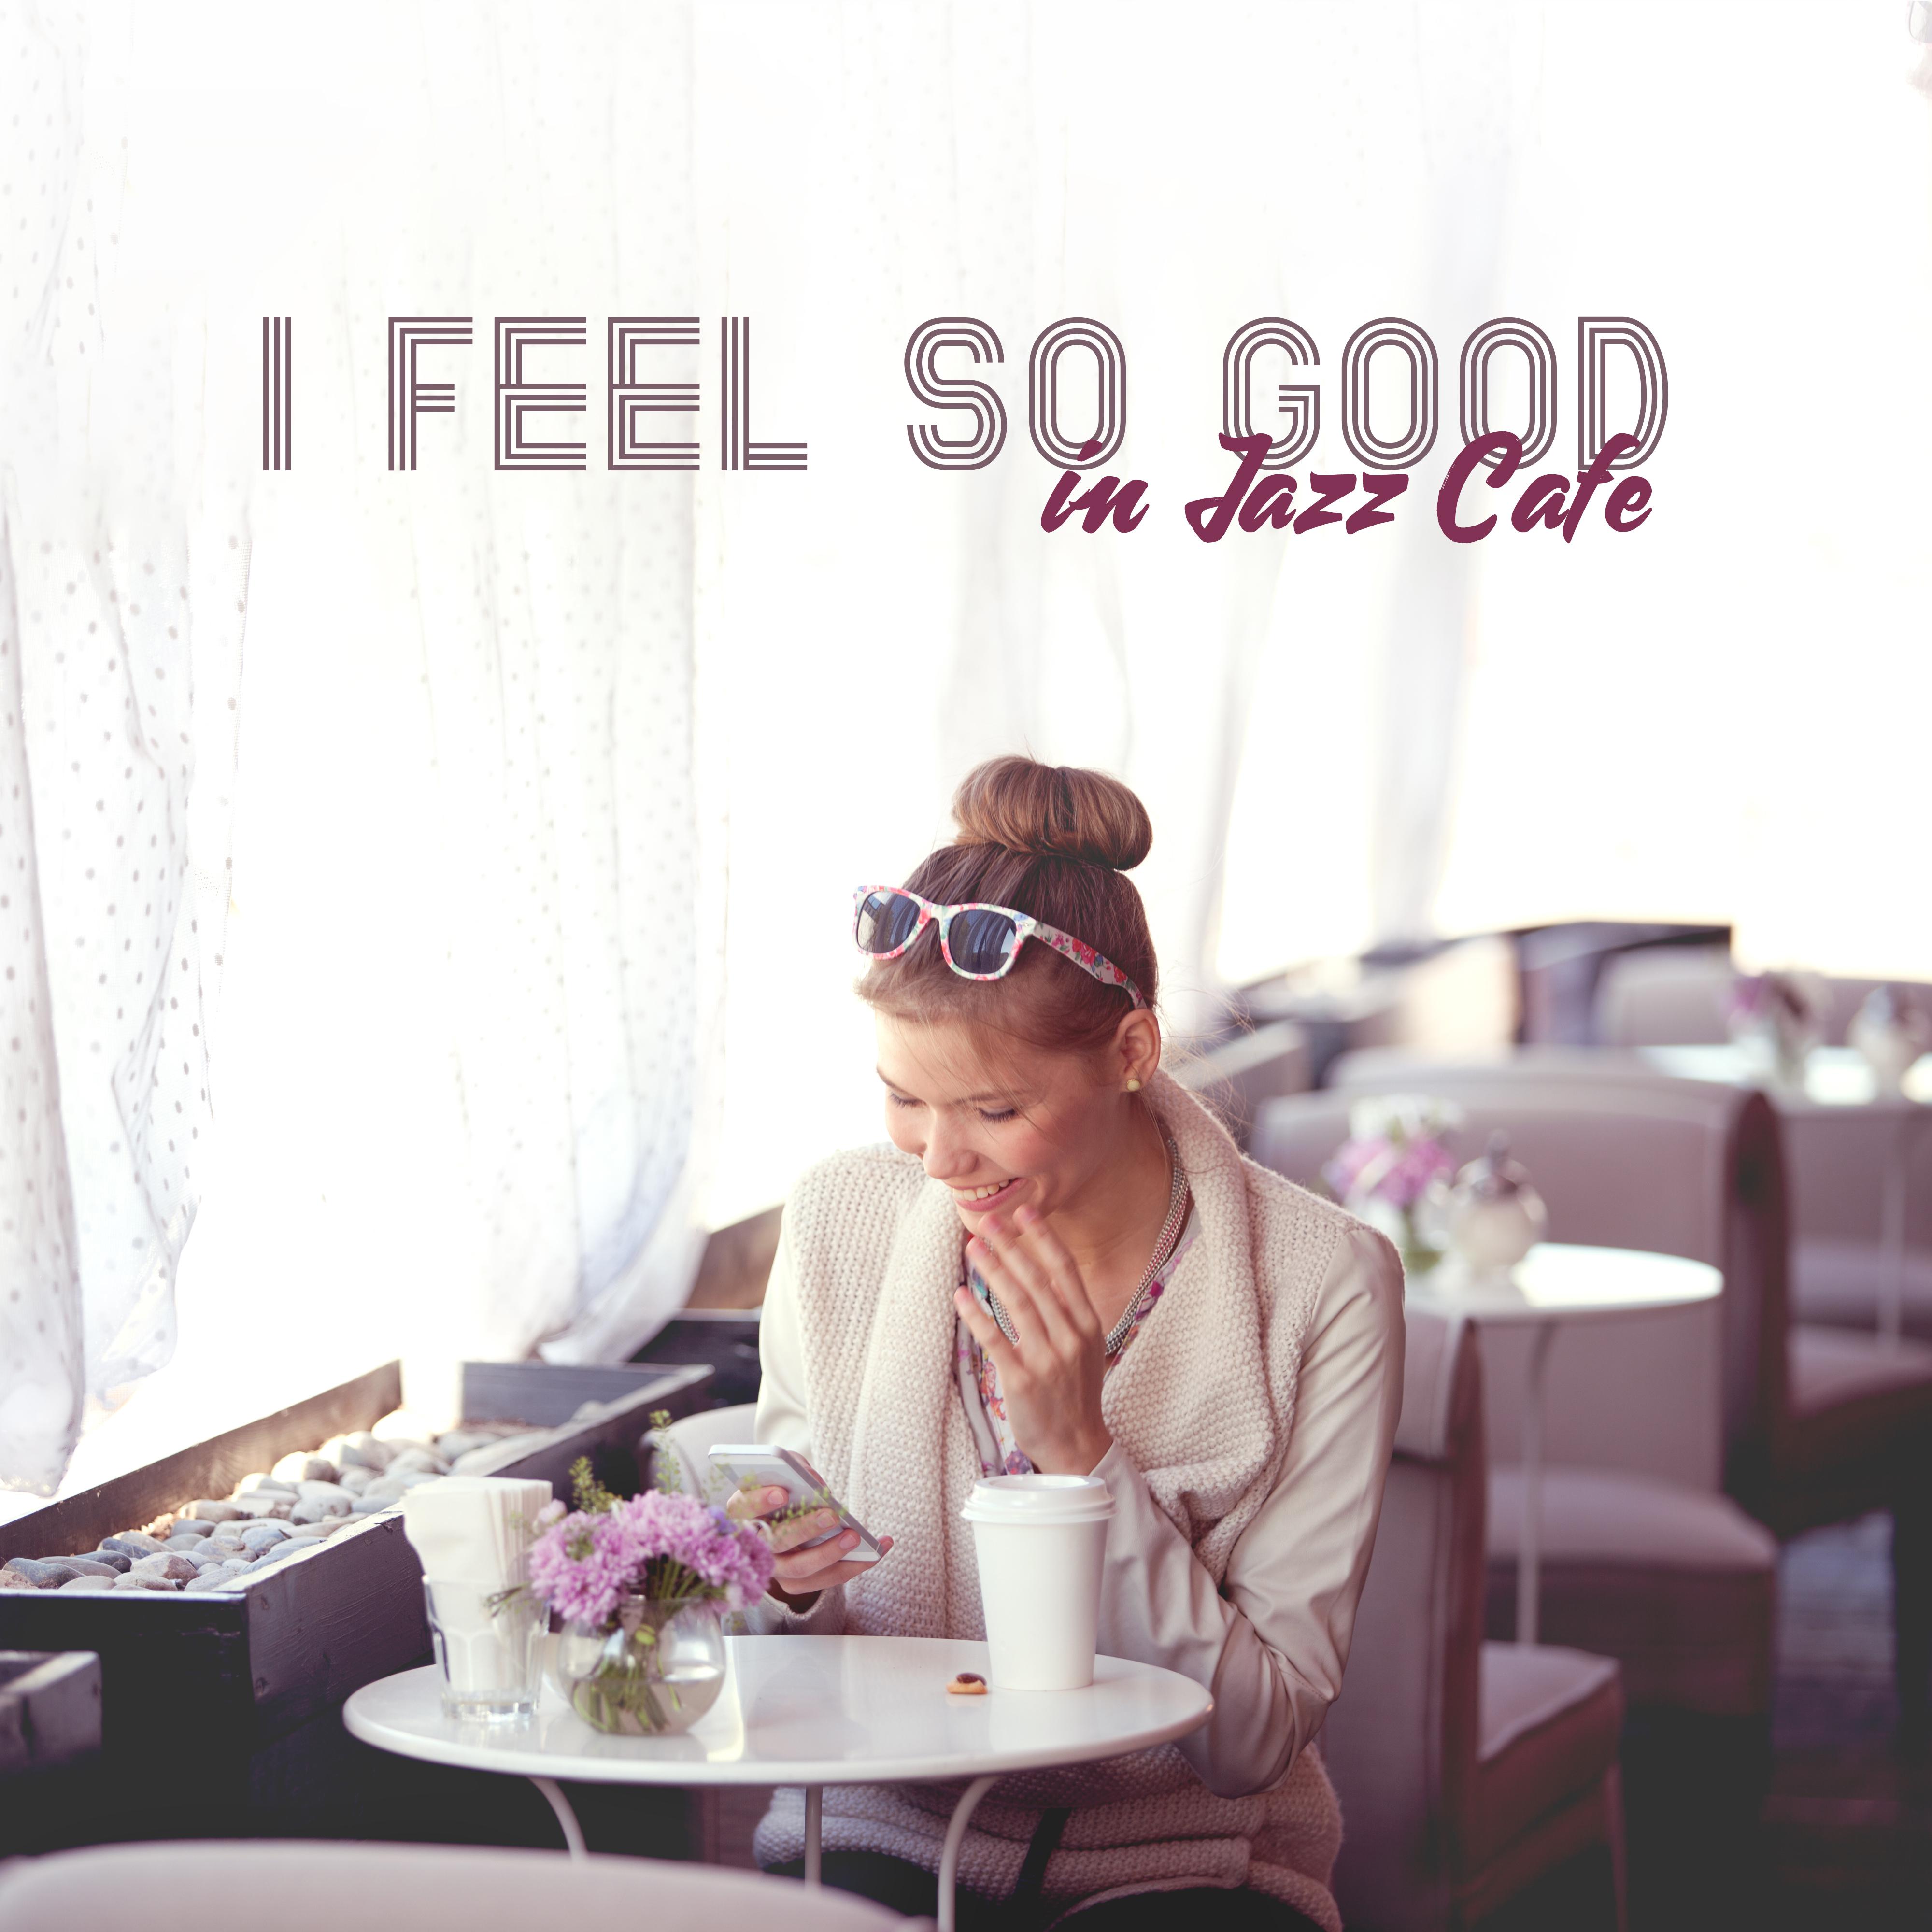 I Feel So Good in Jazz Cafe: 2019 New Smooth Jazz Instrumental Music for Spending Blessed Time wtih Love or Friends in Cafe or Restaurant, Piano Melodies and Vintage Sounds of Sax